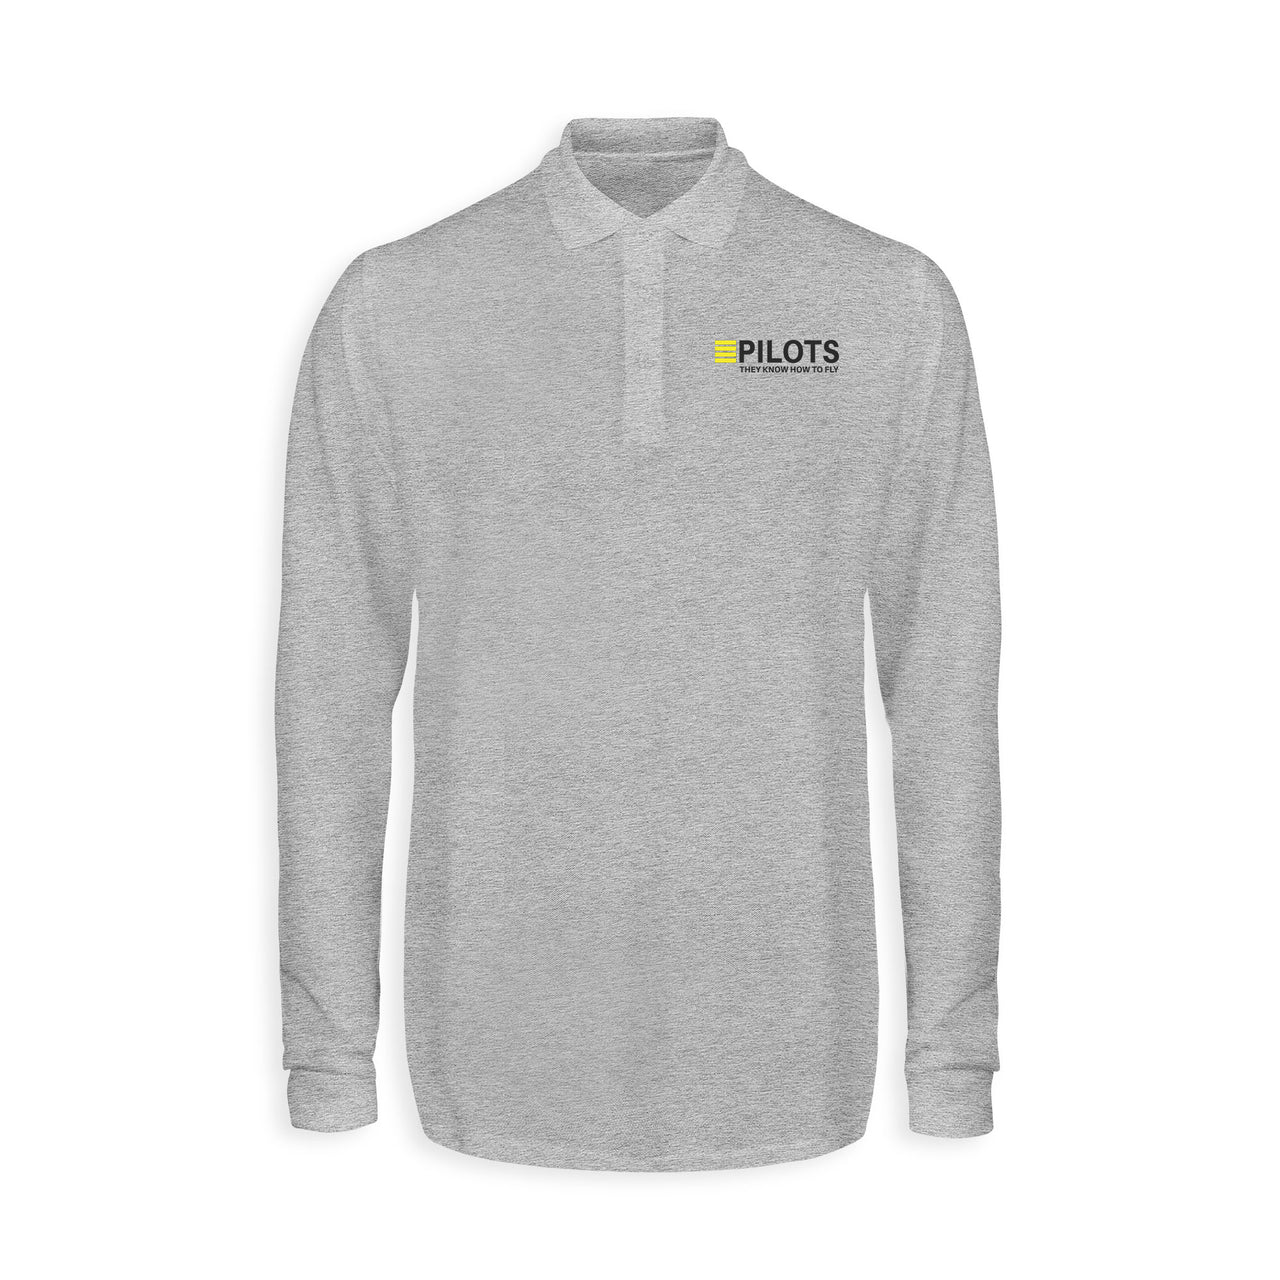 Pilots They Know How To Fly Designed Long Sleeve Polo T-Shirts